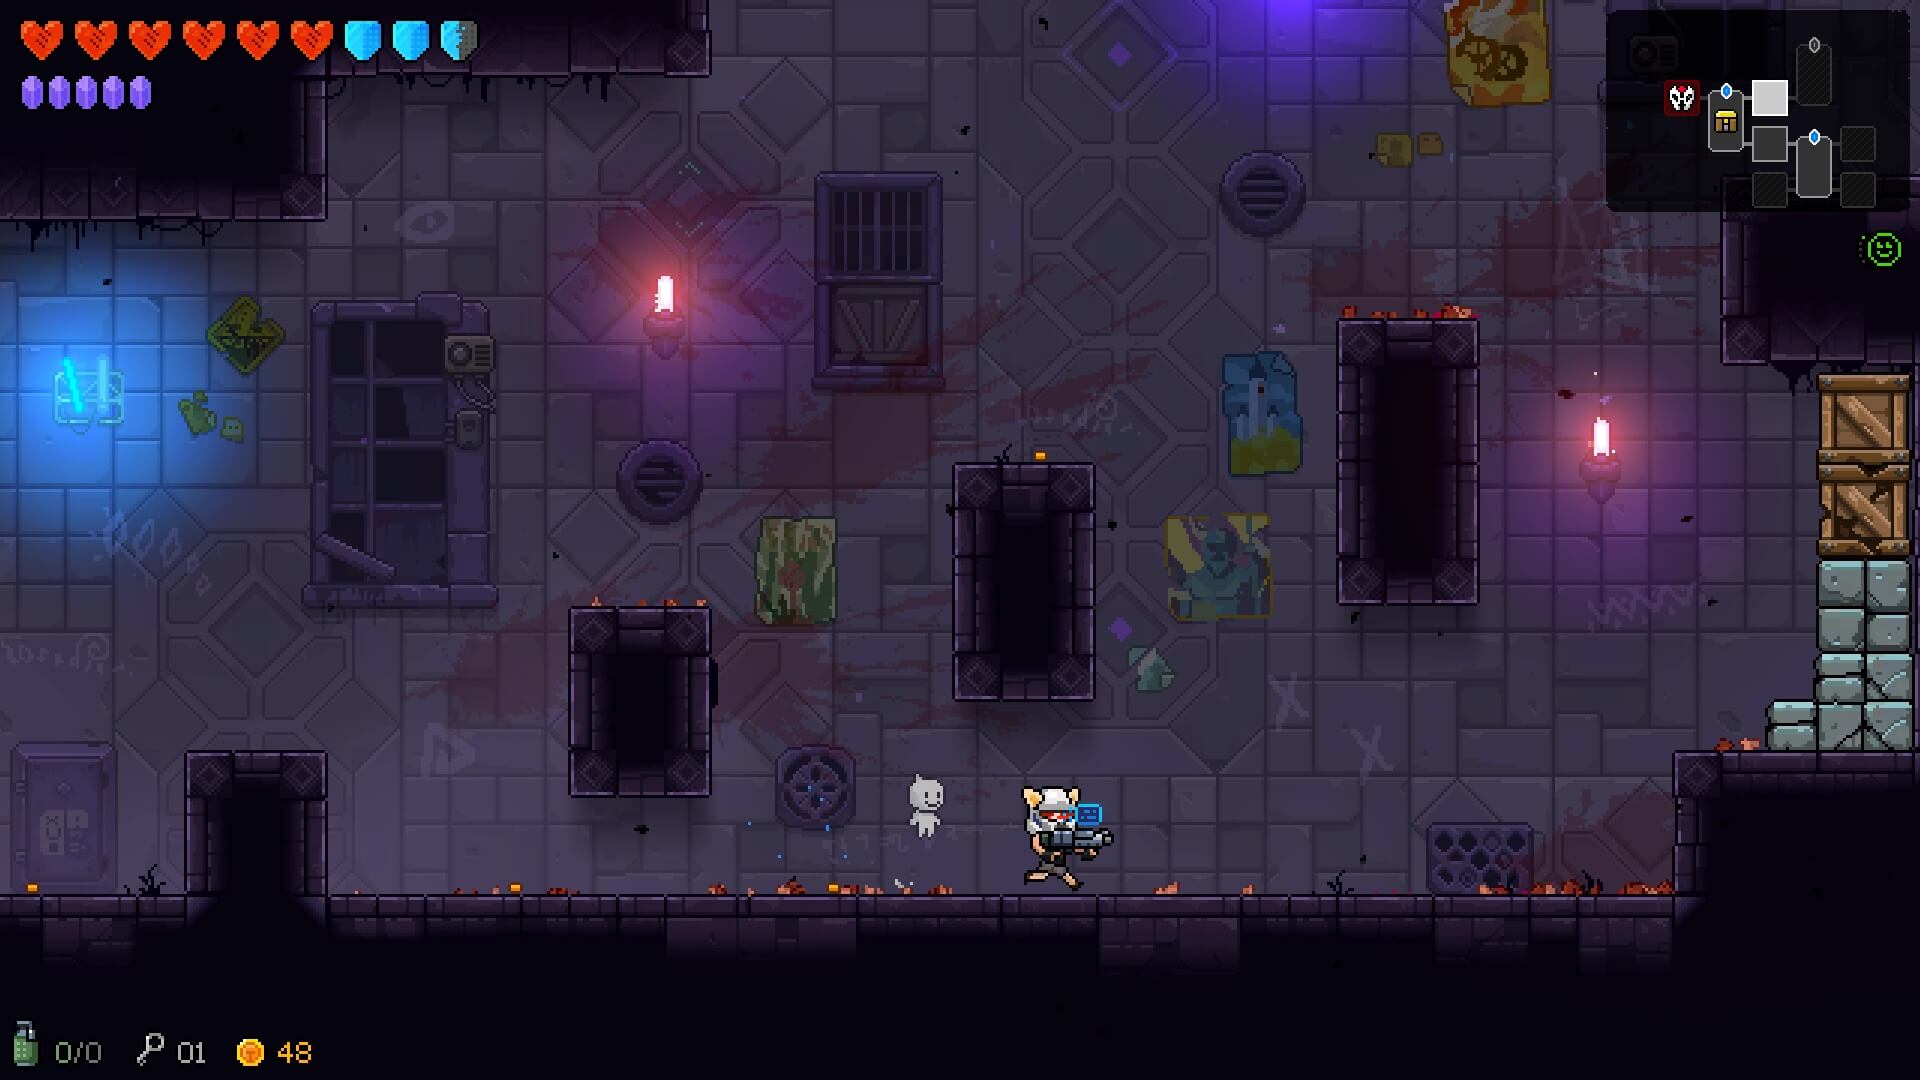 Exploring a dungeon in Neon Abyss